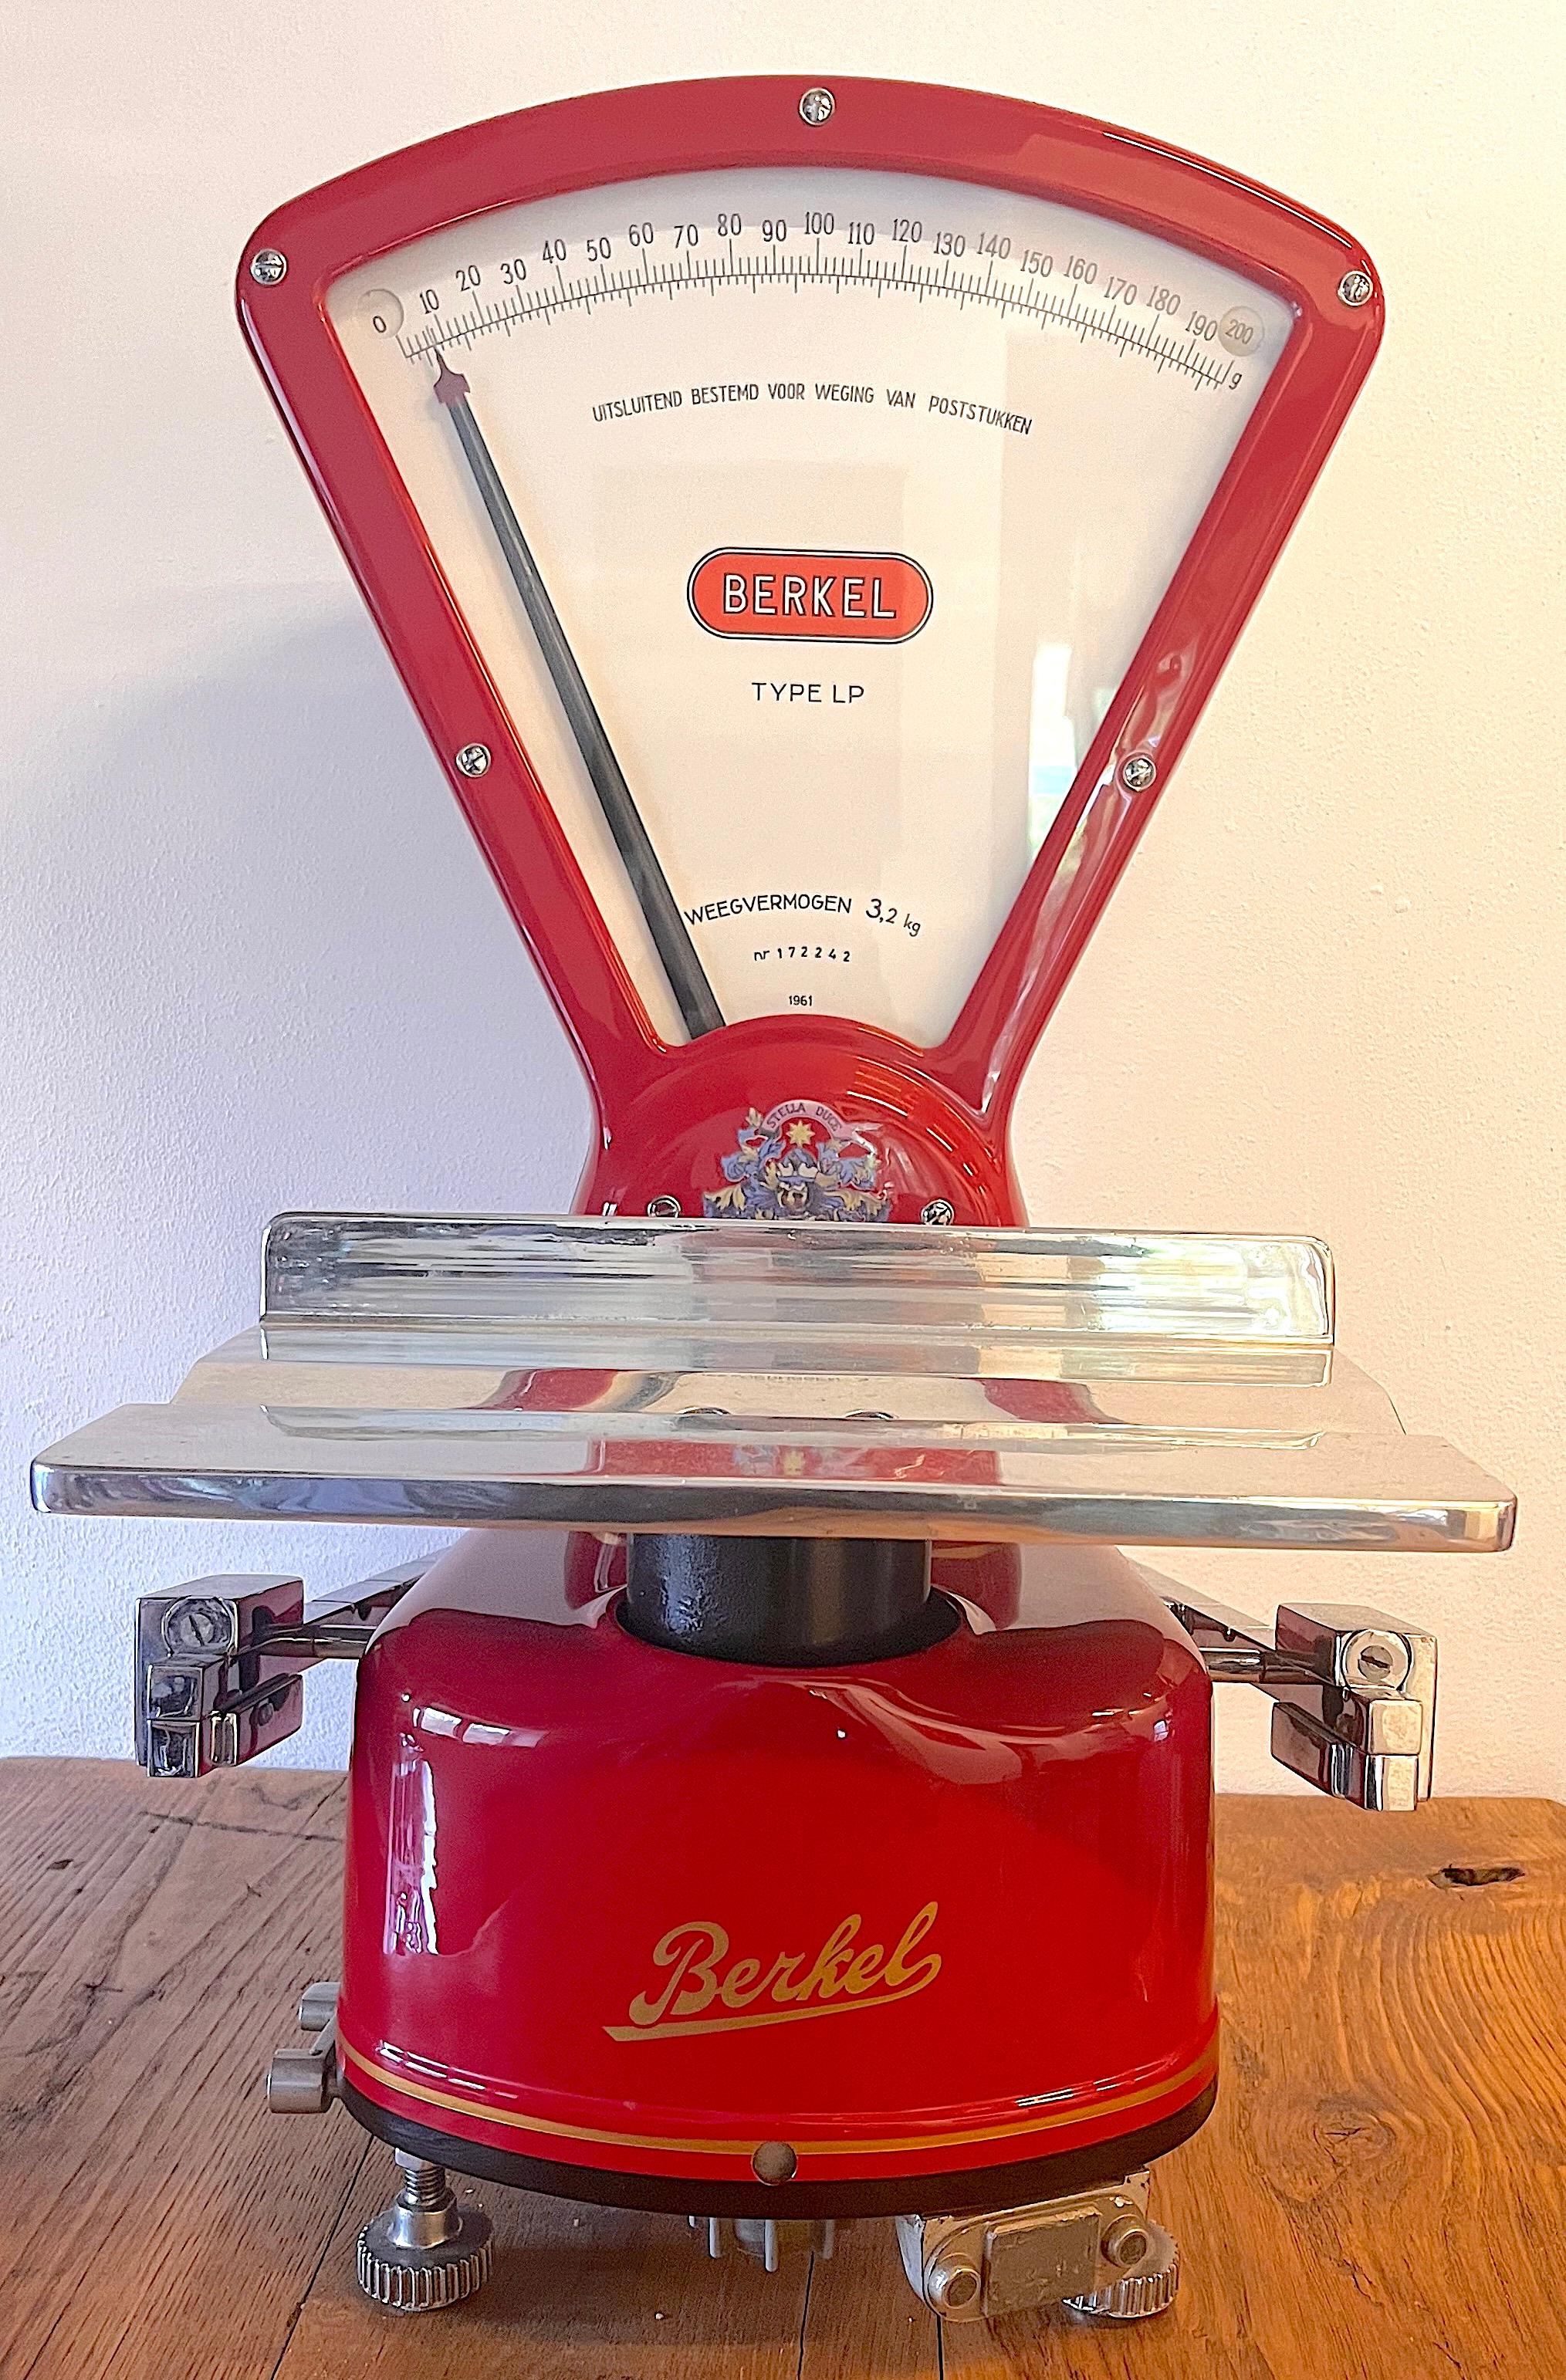 Berkel scale mod.LP from the 1960s made in the Netherlands
